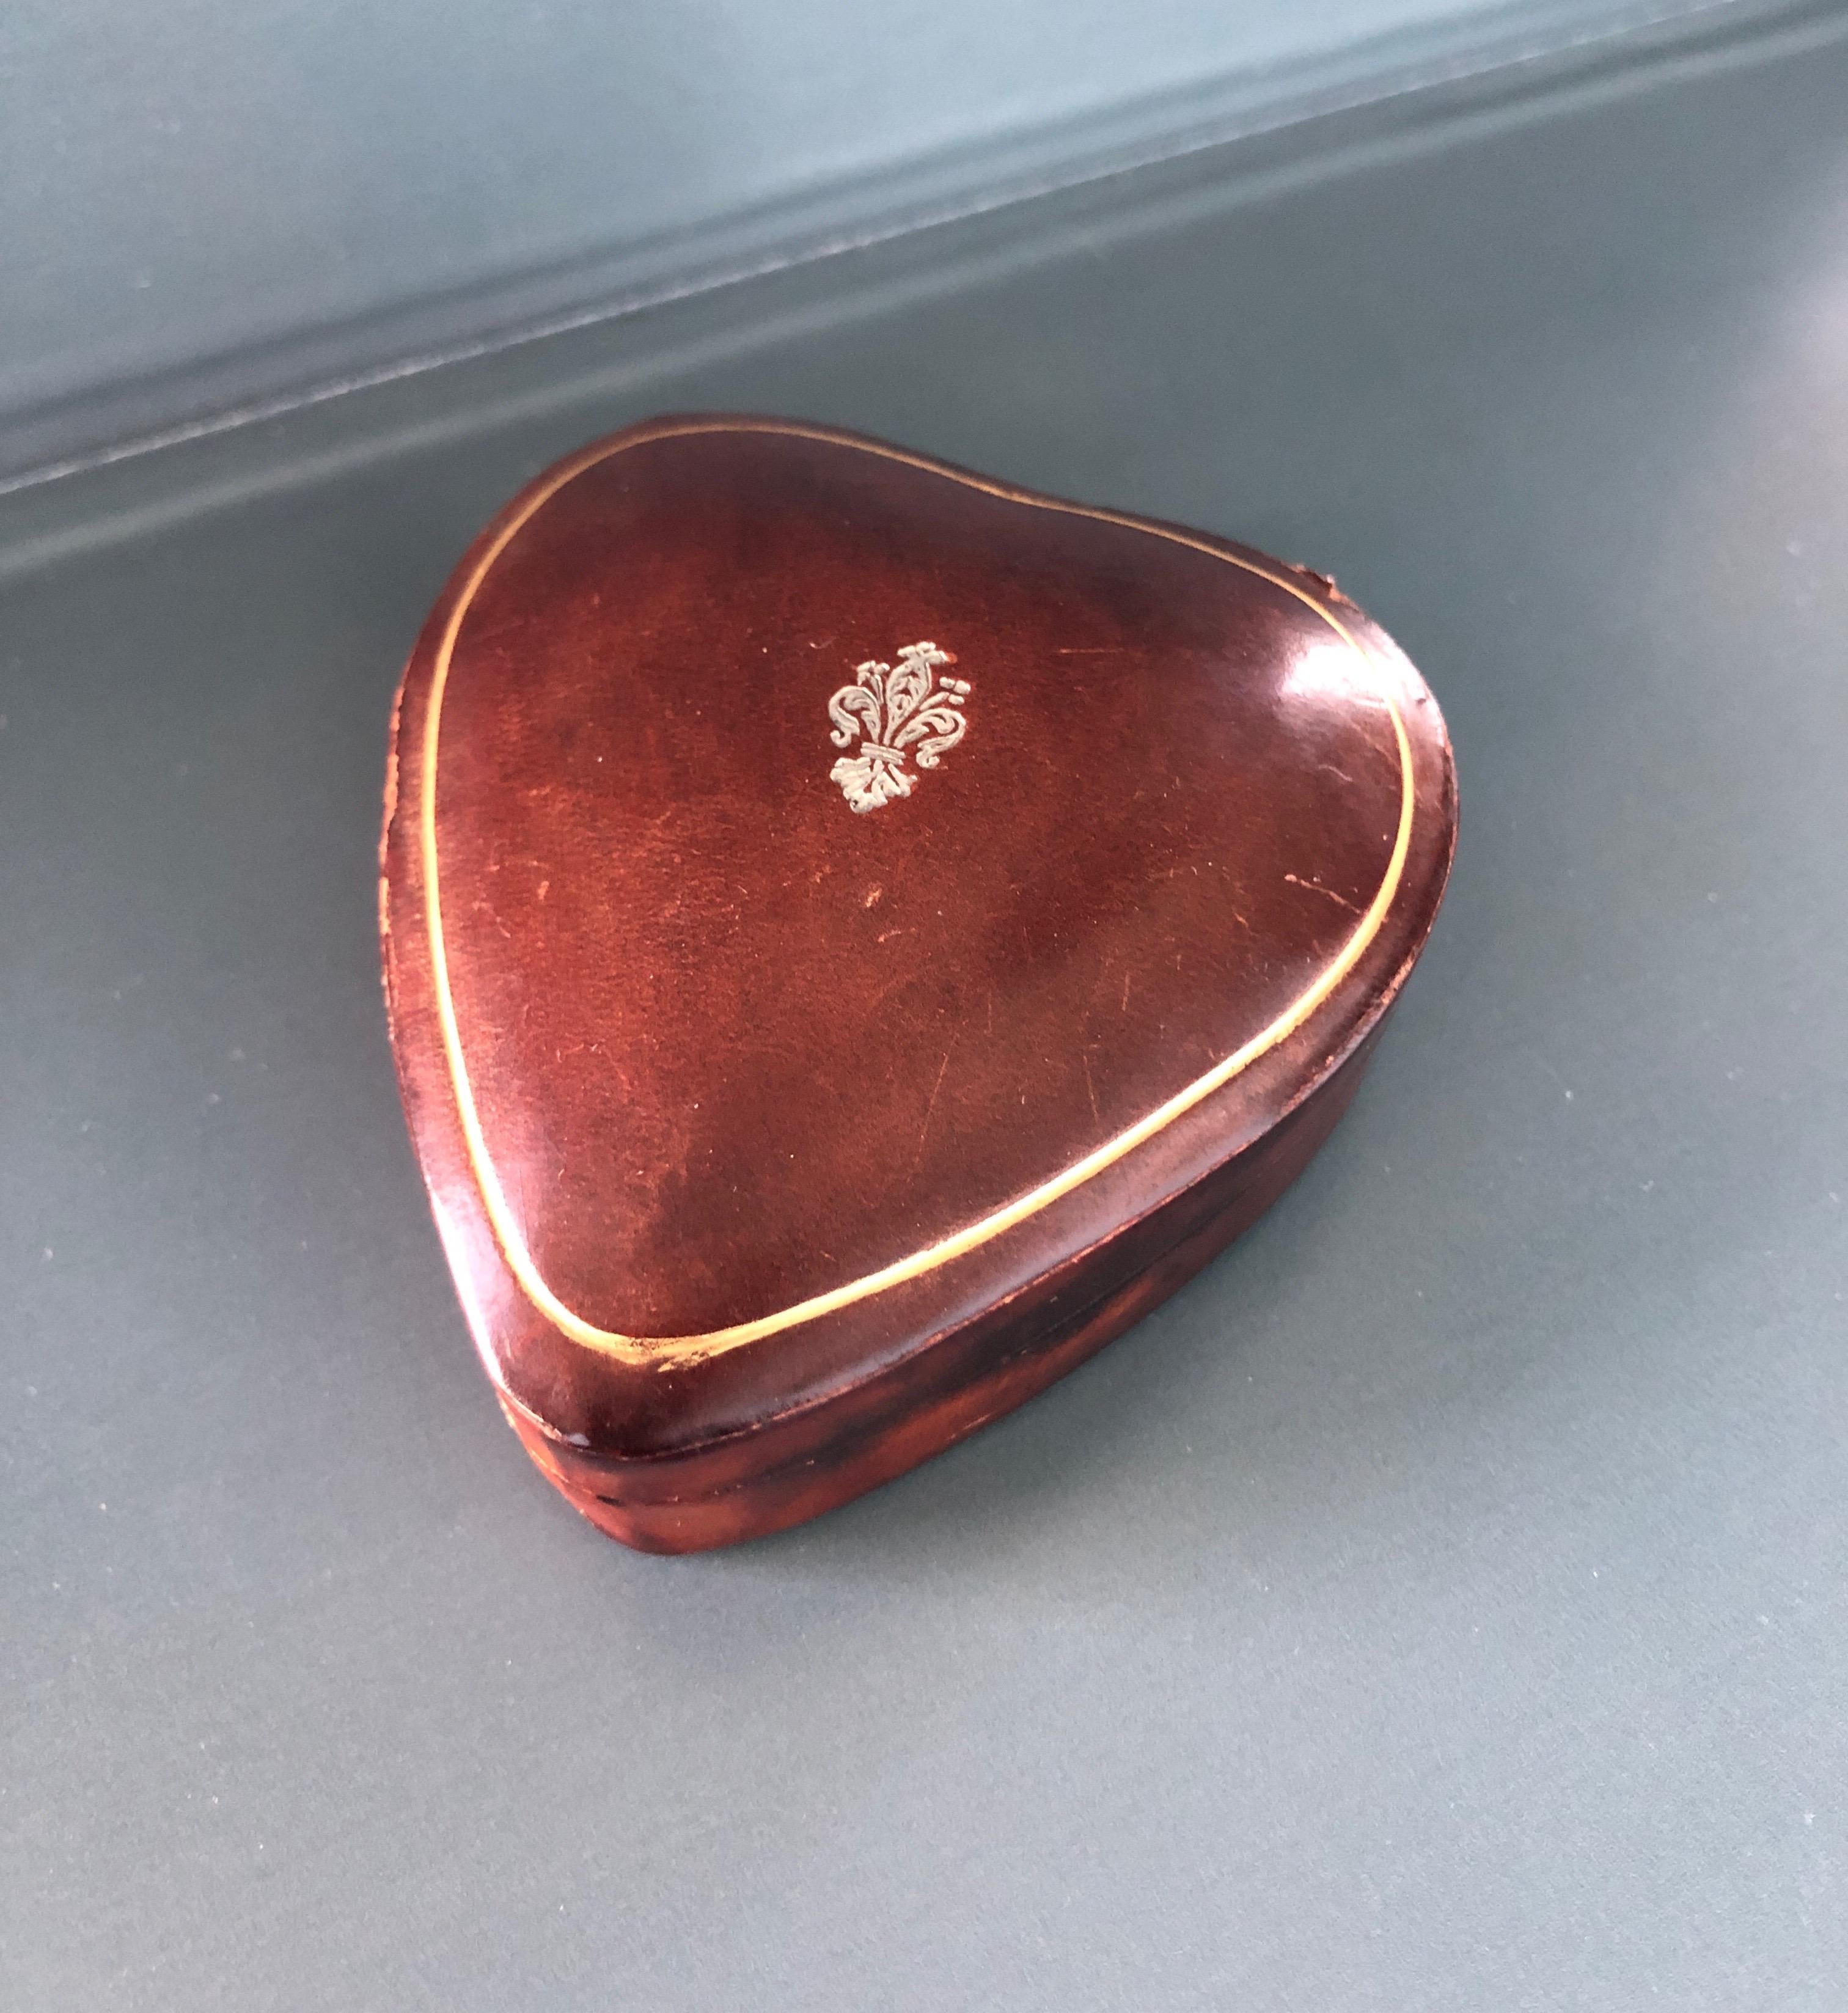 Florentine heart shaped vintage trinket embossed Italian leather box
In brown and gold
Stamped in the back: Genuine leather Made in Italy
Size: 2.5 x 2.5 0.25.